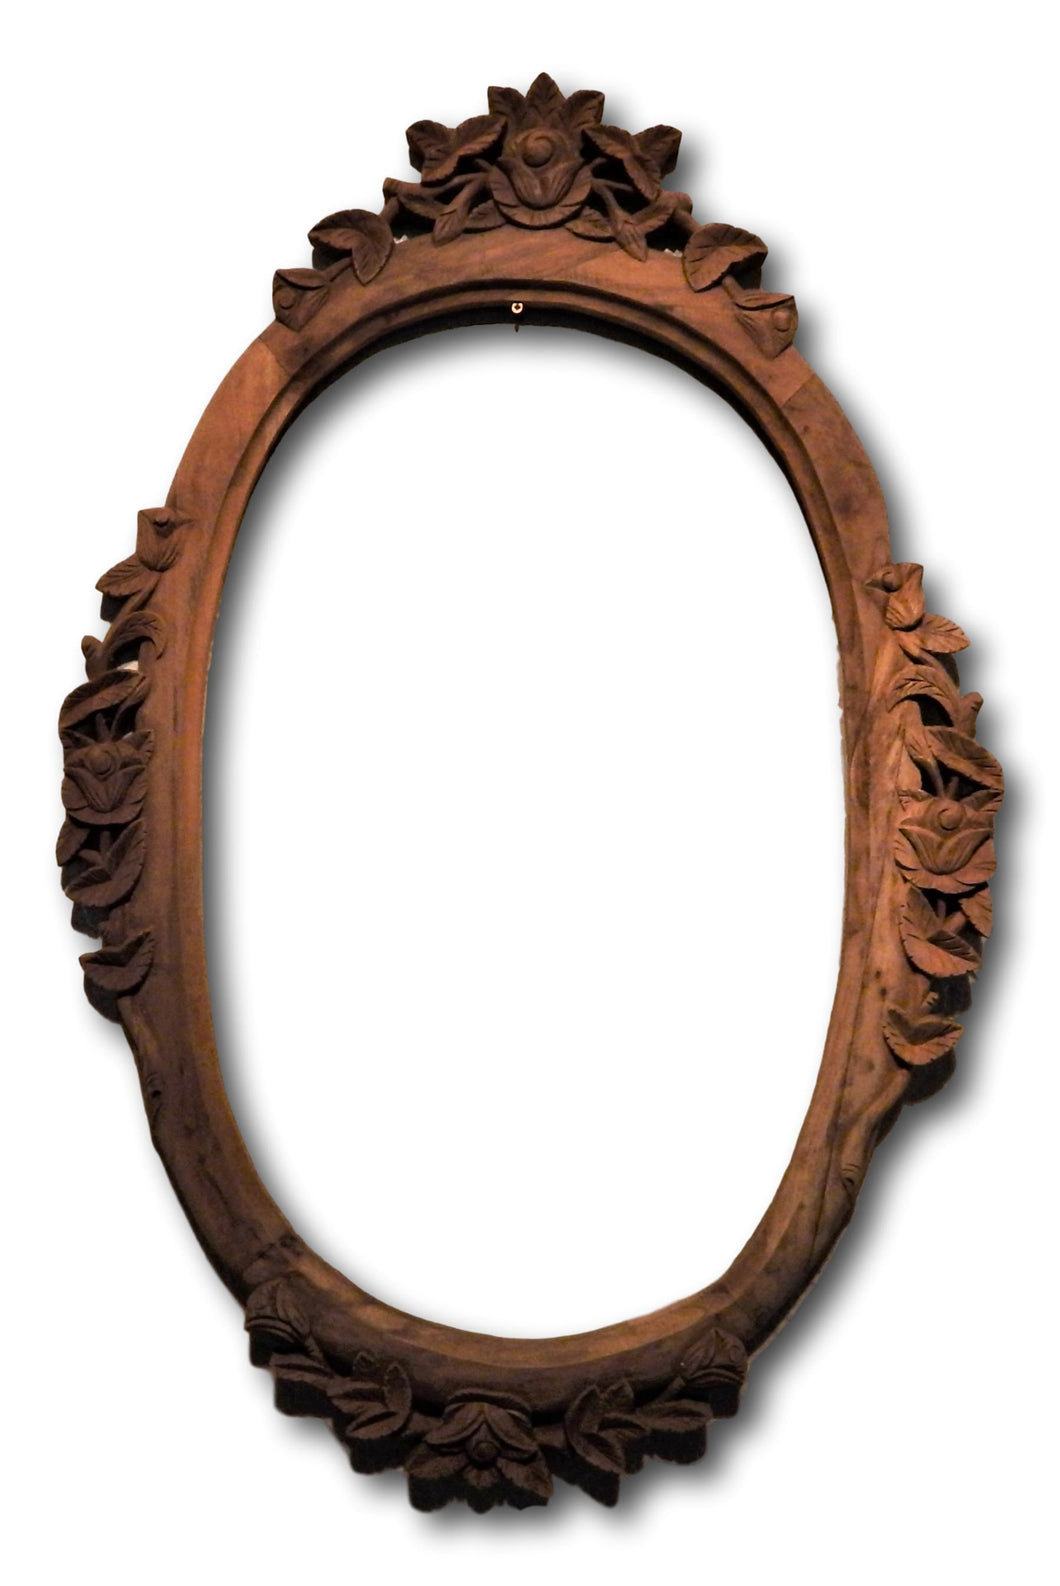 Picture frame handcrafted from Teak wood